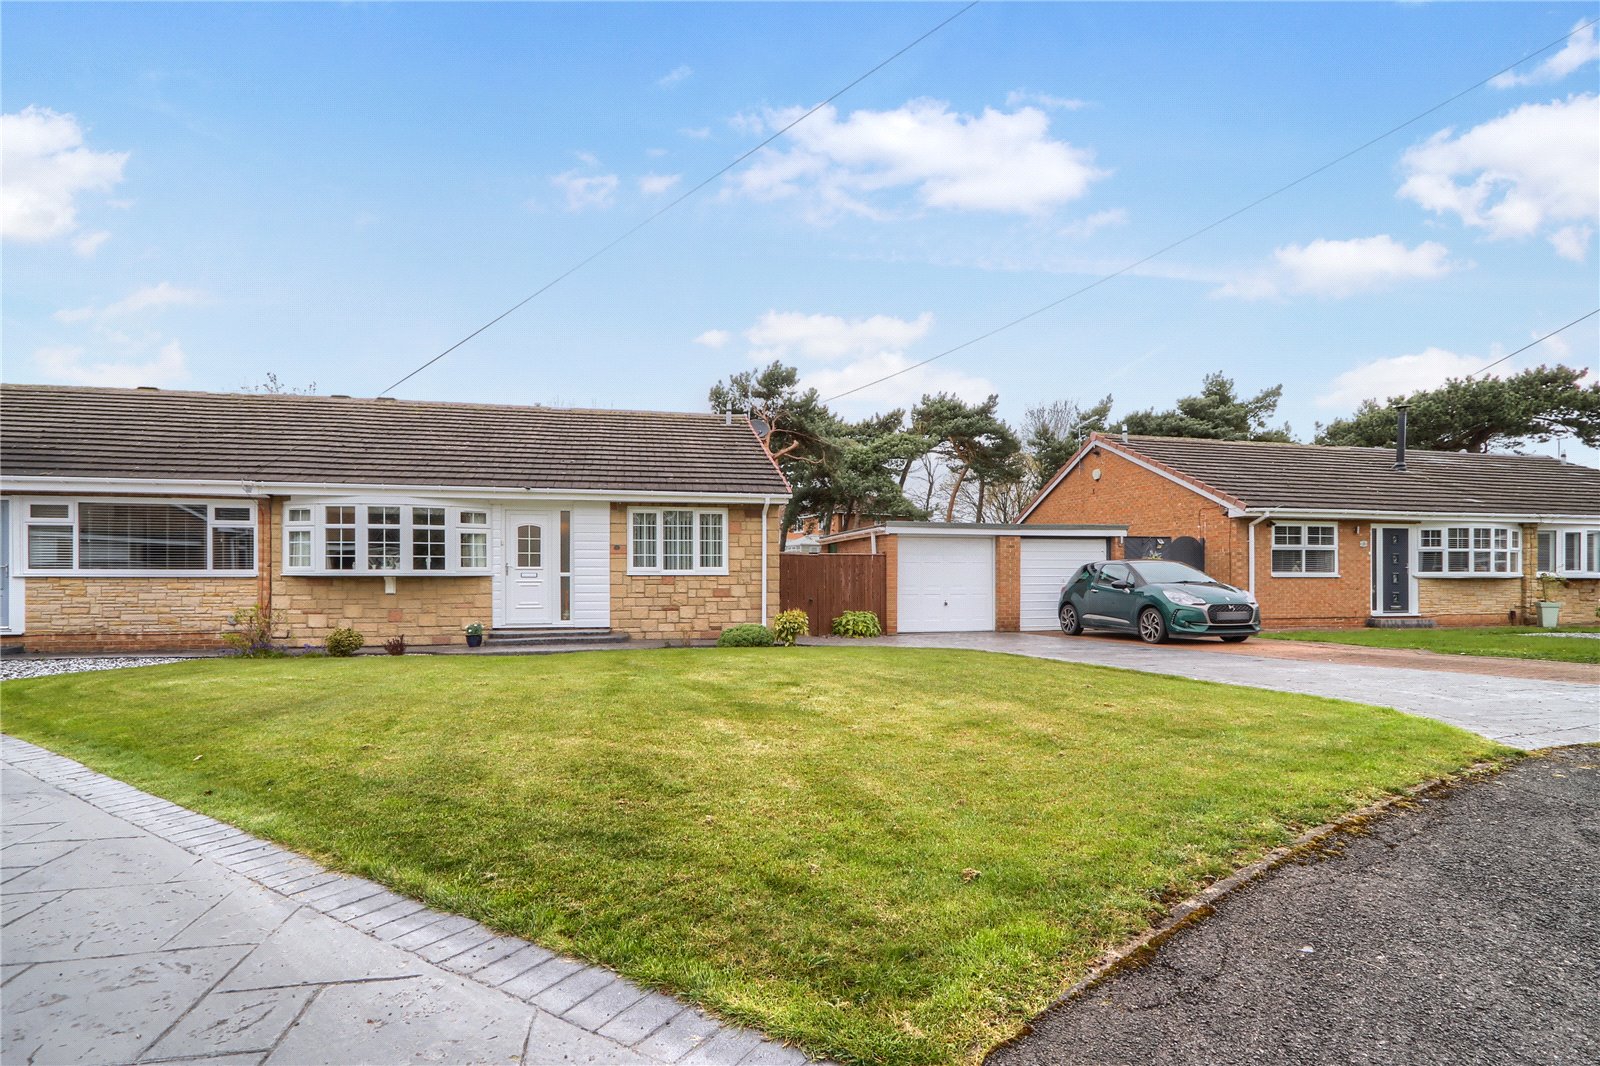 2 bed bungalow for sale in Virginia Close, Stockton-on-Tees 1